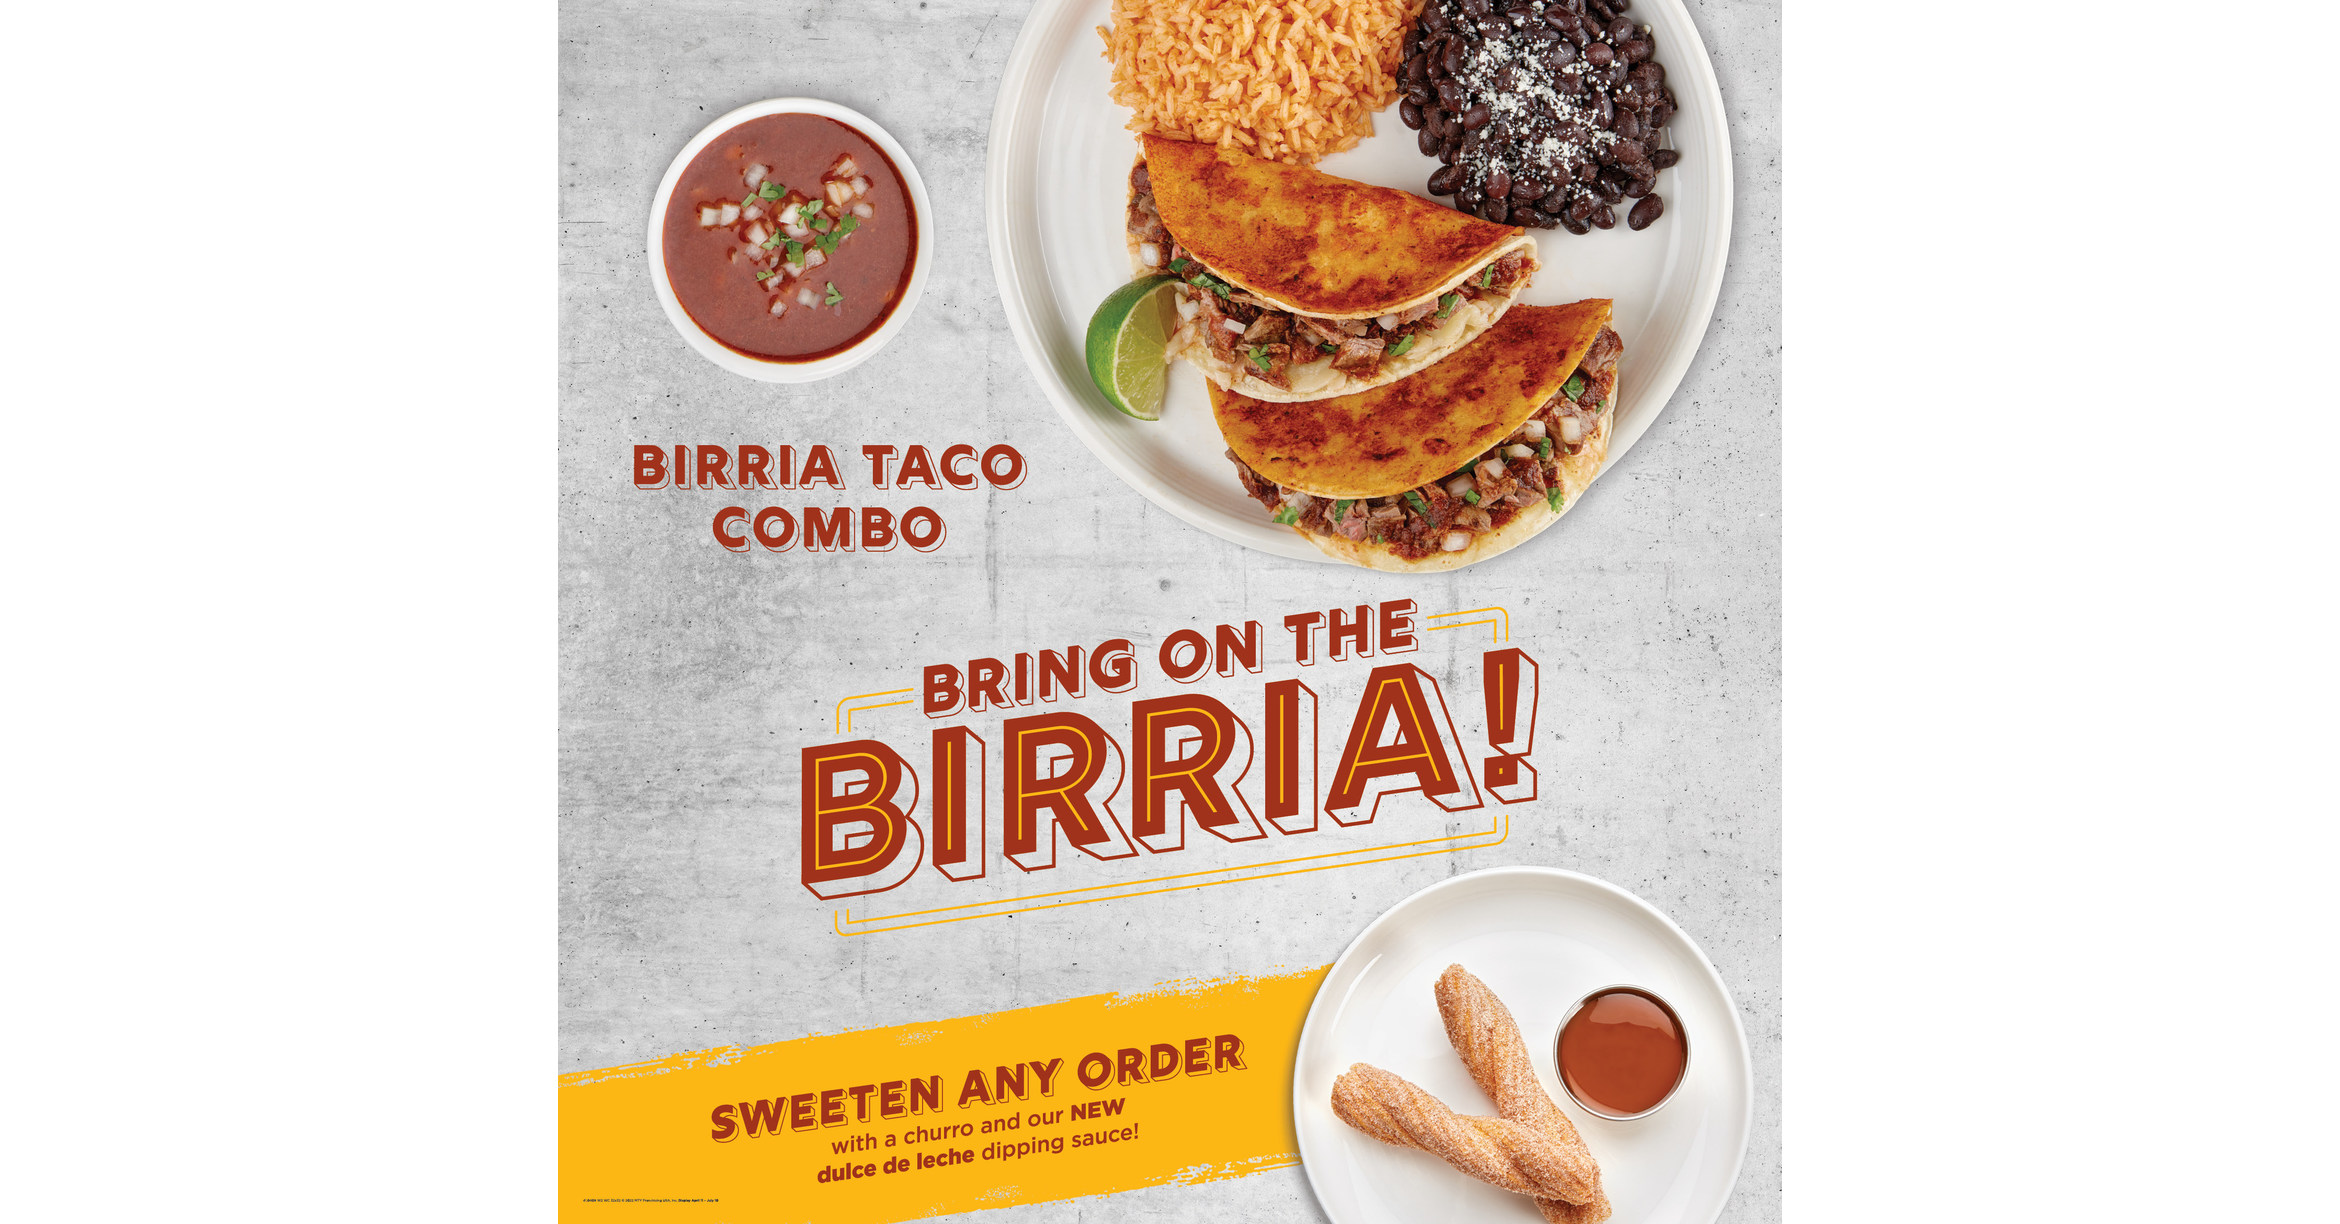 Baja Fresh Brings on the Birria with New Tacos for a Limited Time